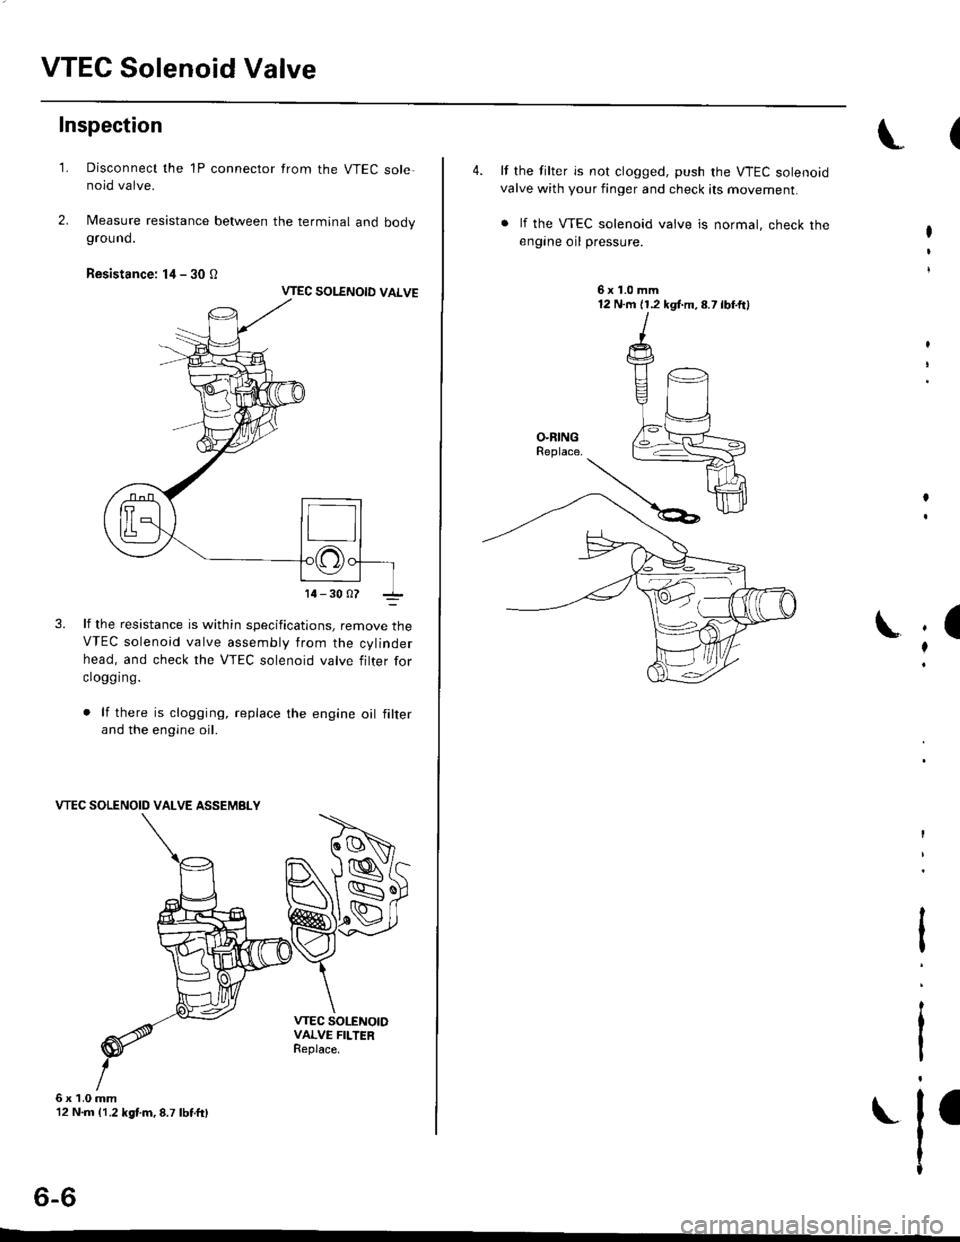 HONDA CIVIC 1998 6.G User Guide VTEC Solenoid Valve
Inspection
1.
6x1.0mm12 N.m 11.2 kgf.m,8.7 lbtft)
Disconnect the 1P connector from the VTEC sole-noid valve.
Measure resistance between the terminal and bodyground.
Resistance: l4 